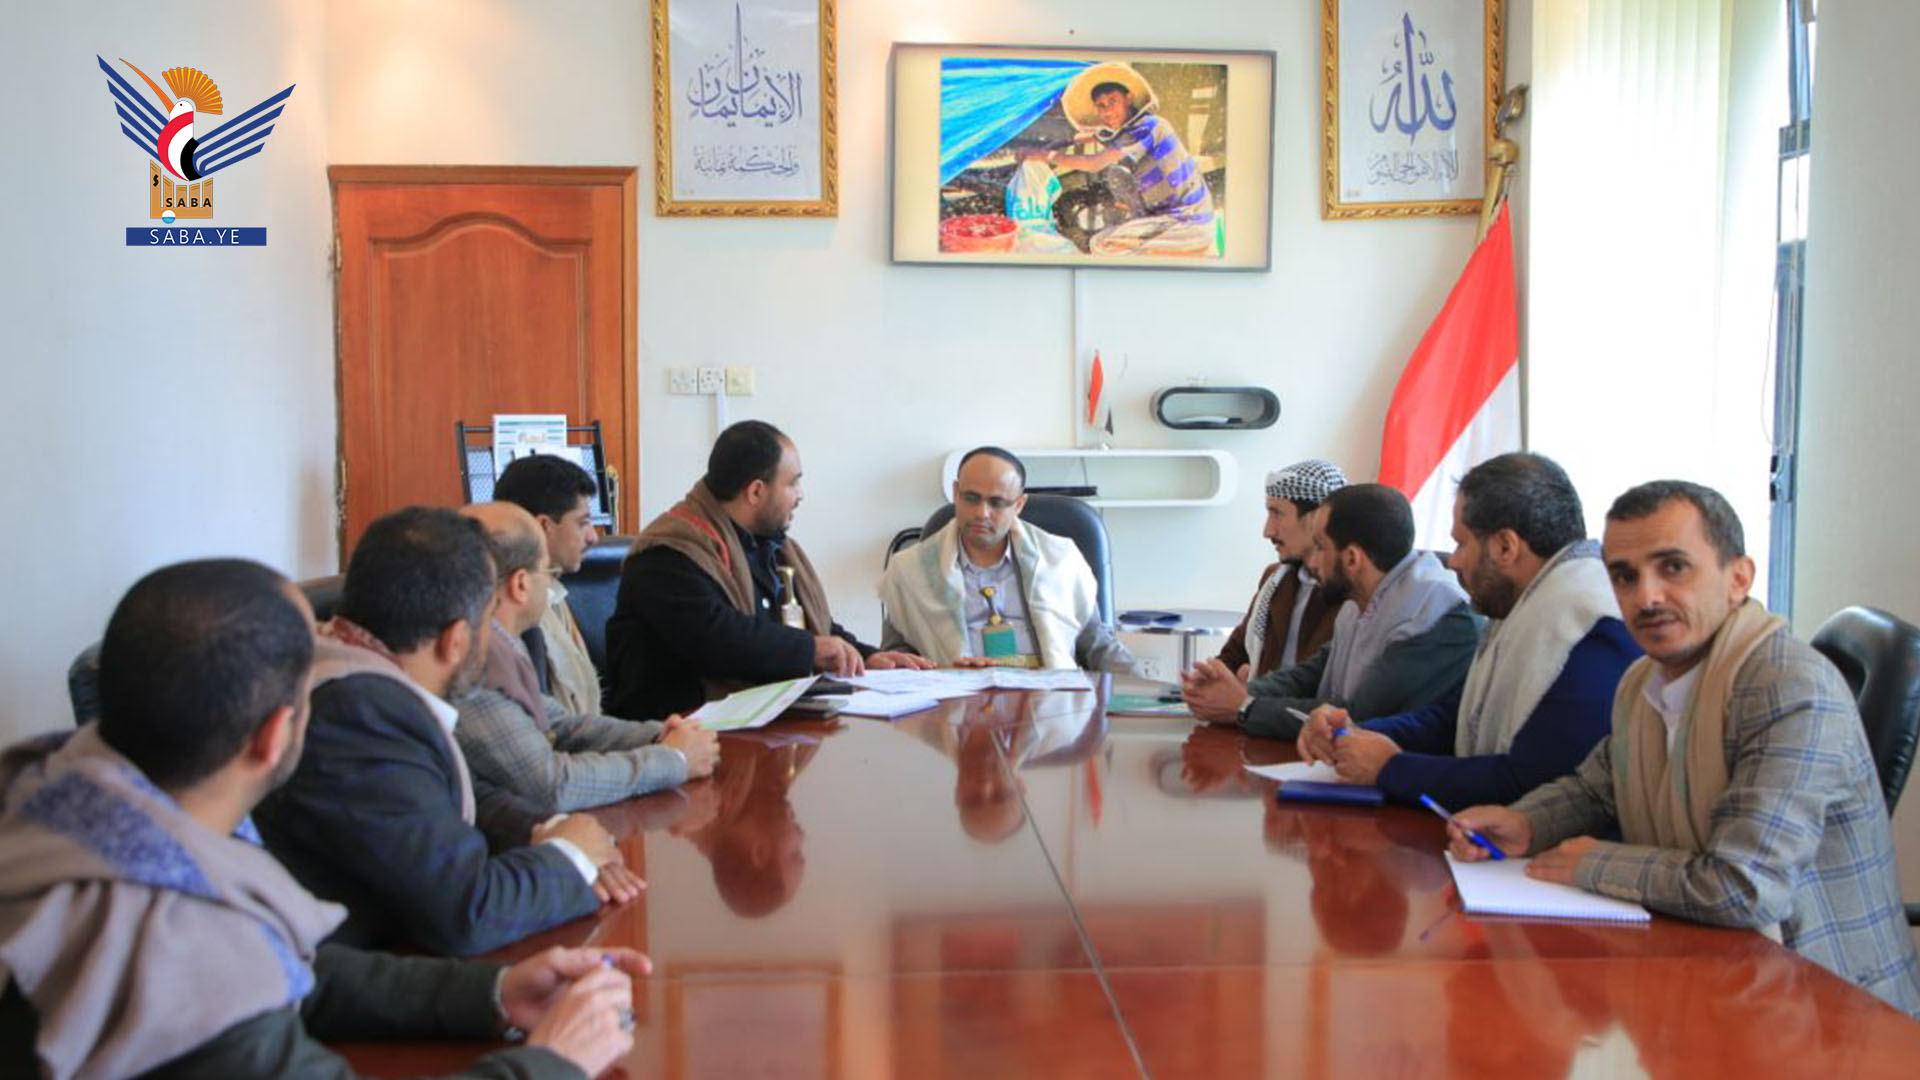 President Al-Mashat visits Zakat Authority &blesses its efforts in implementing zakat projects for poor & needy